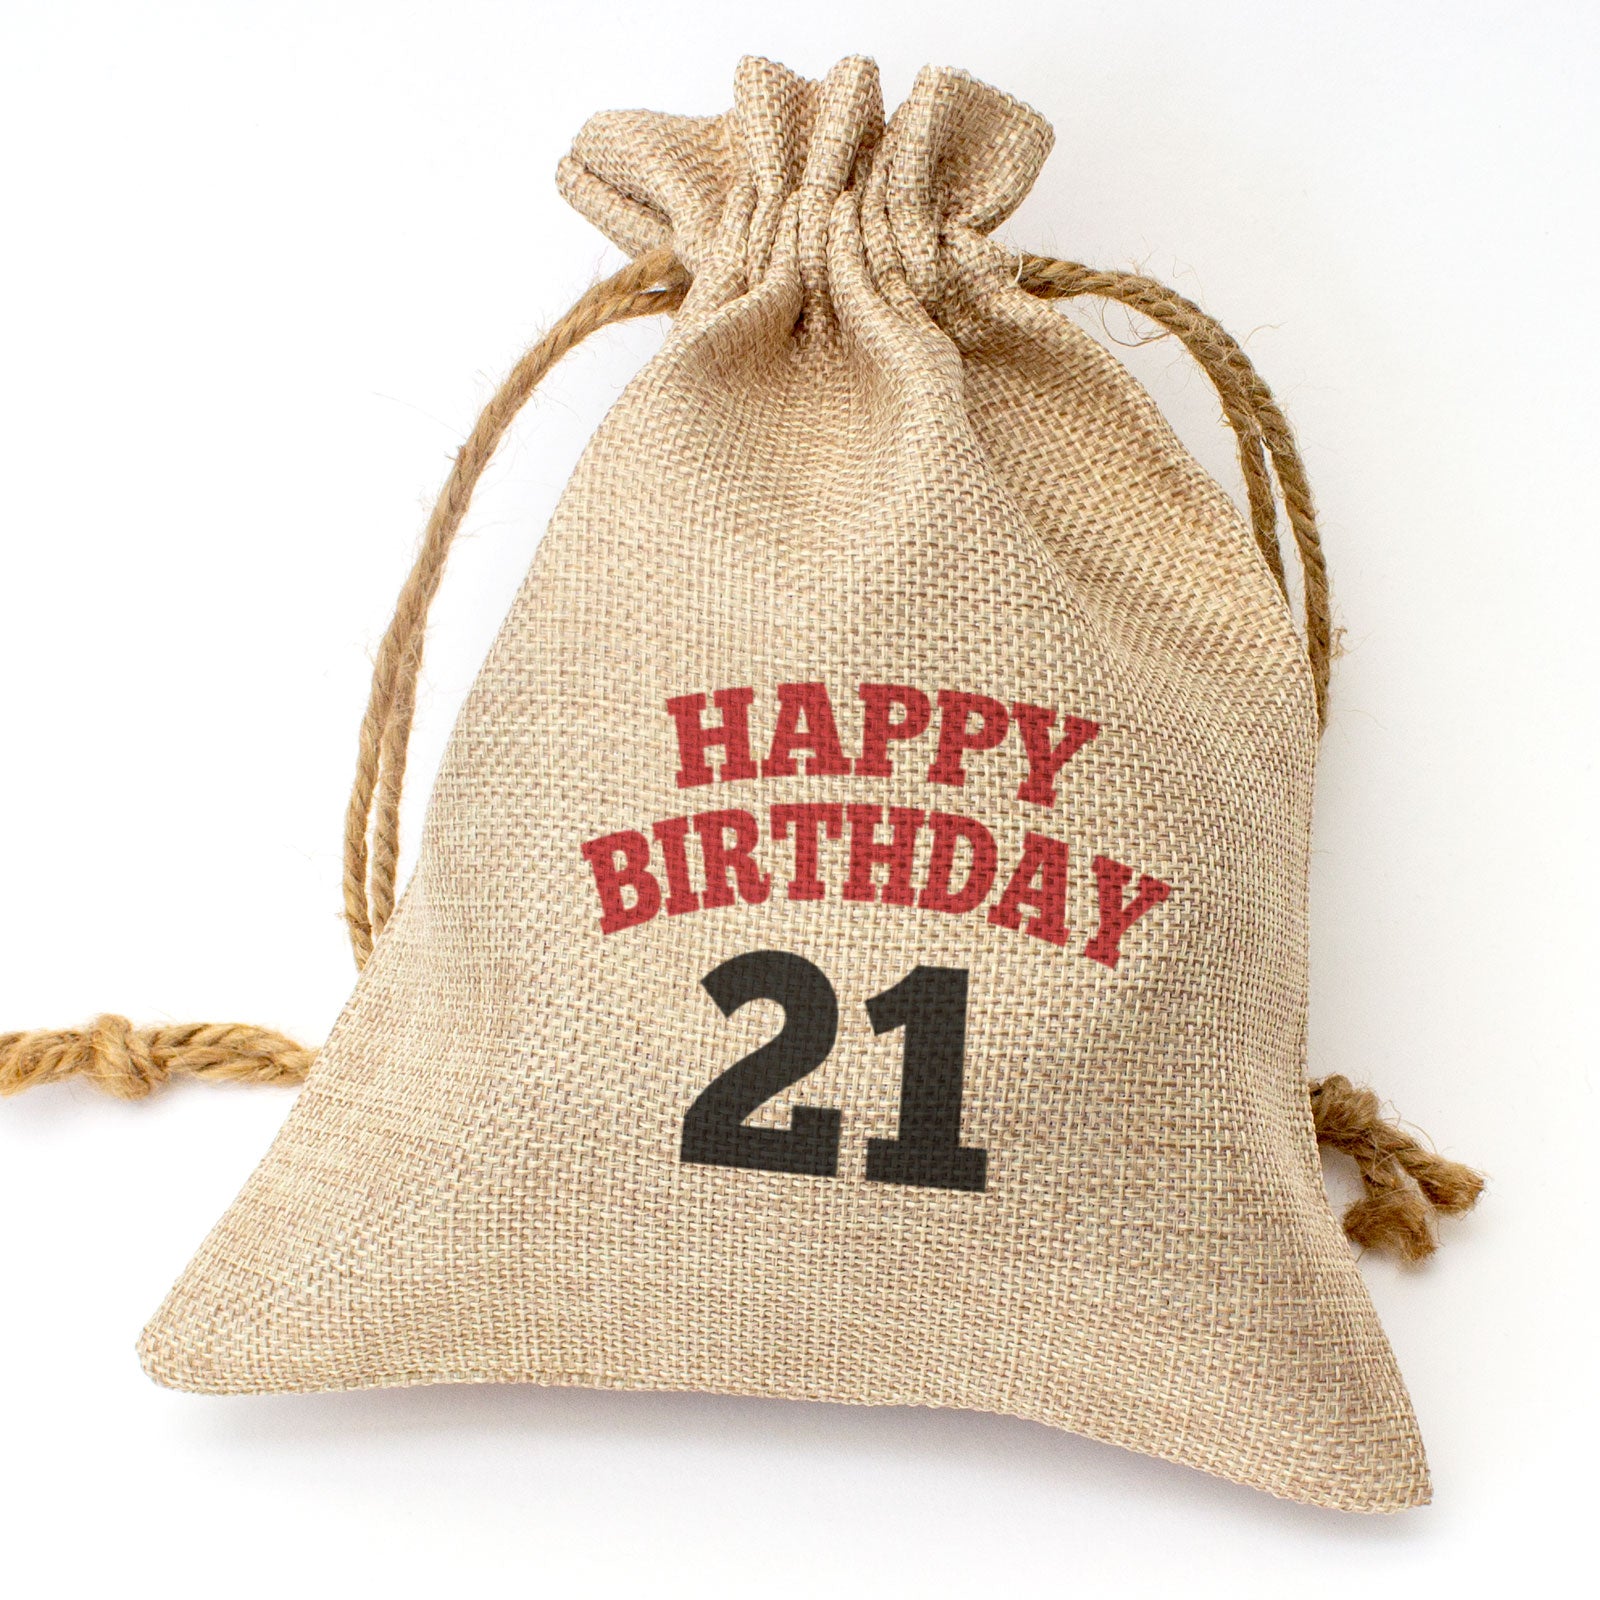 HAPPY BIRTHDAY 21 - Toasted Coconut Bowl Candle – Soy Wax - Gift Present